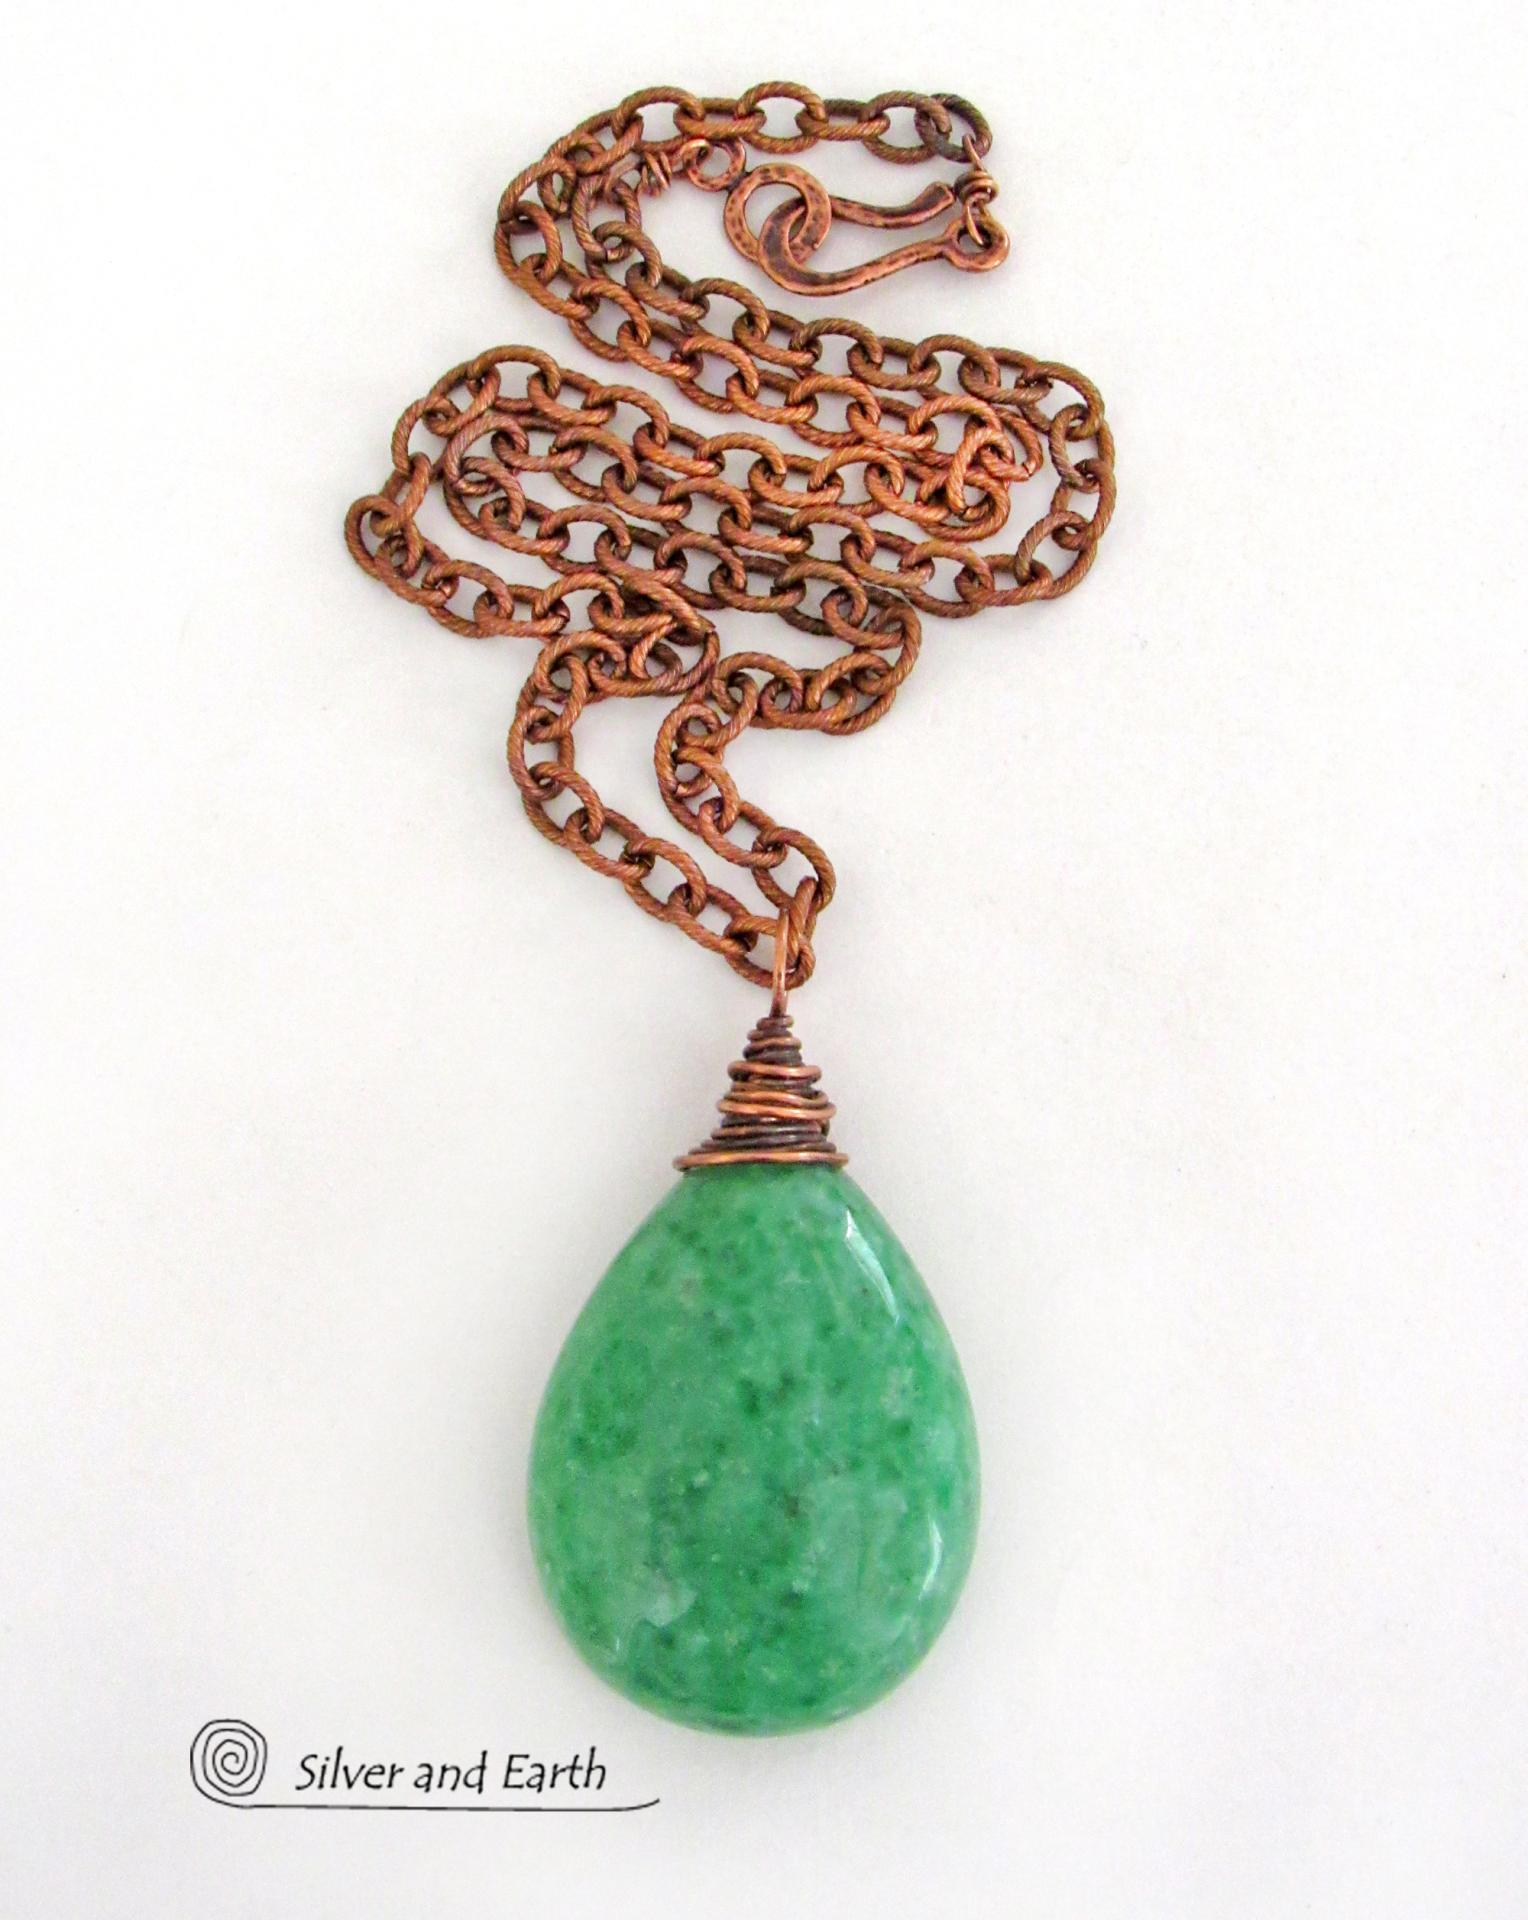 Large Chunky Green Jade Pendant Necklace Copper Wire Wrapped - Modern Earthy Natural Stone Jewelry